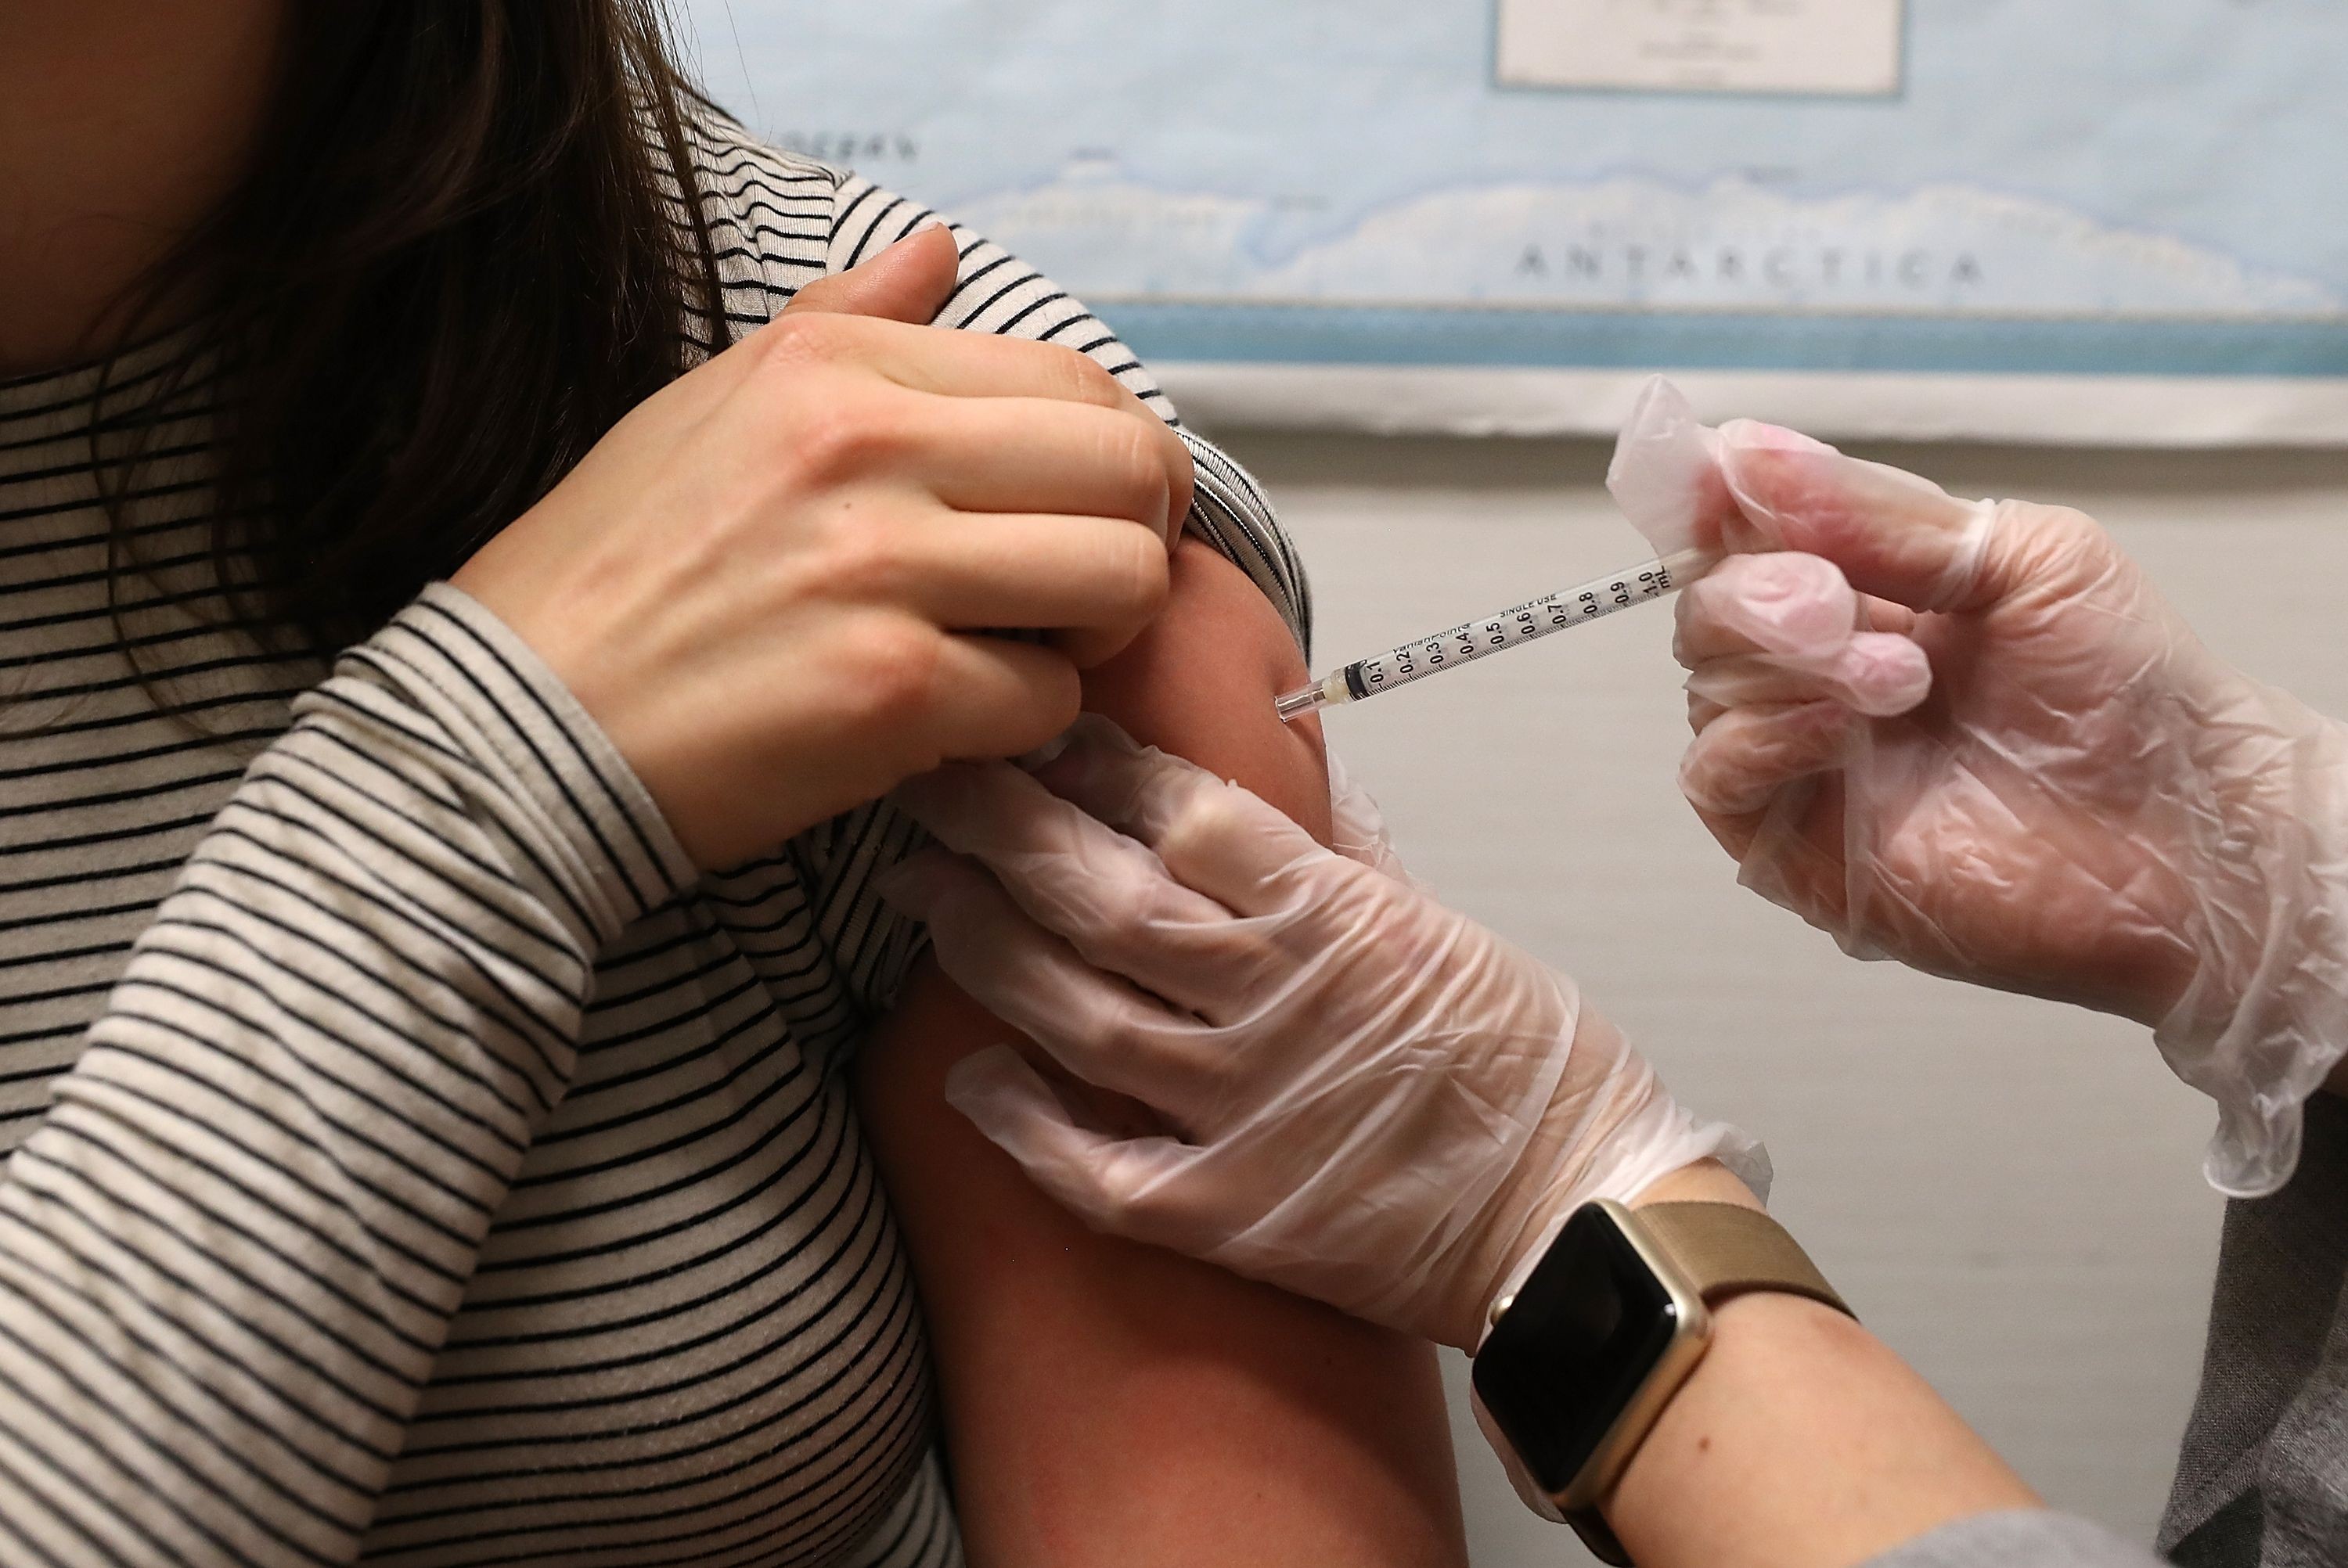 the growing anti-vaccine movement has seen a re-emergence of the disease. Photo: AFP